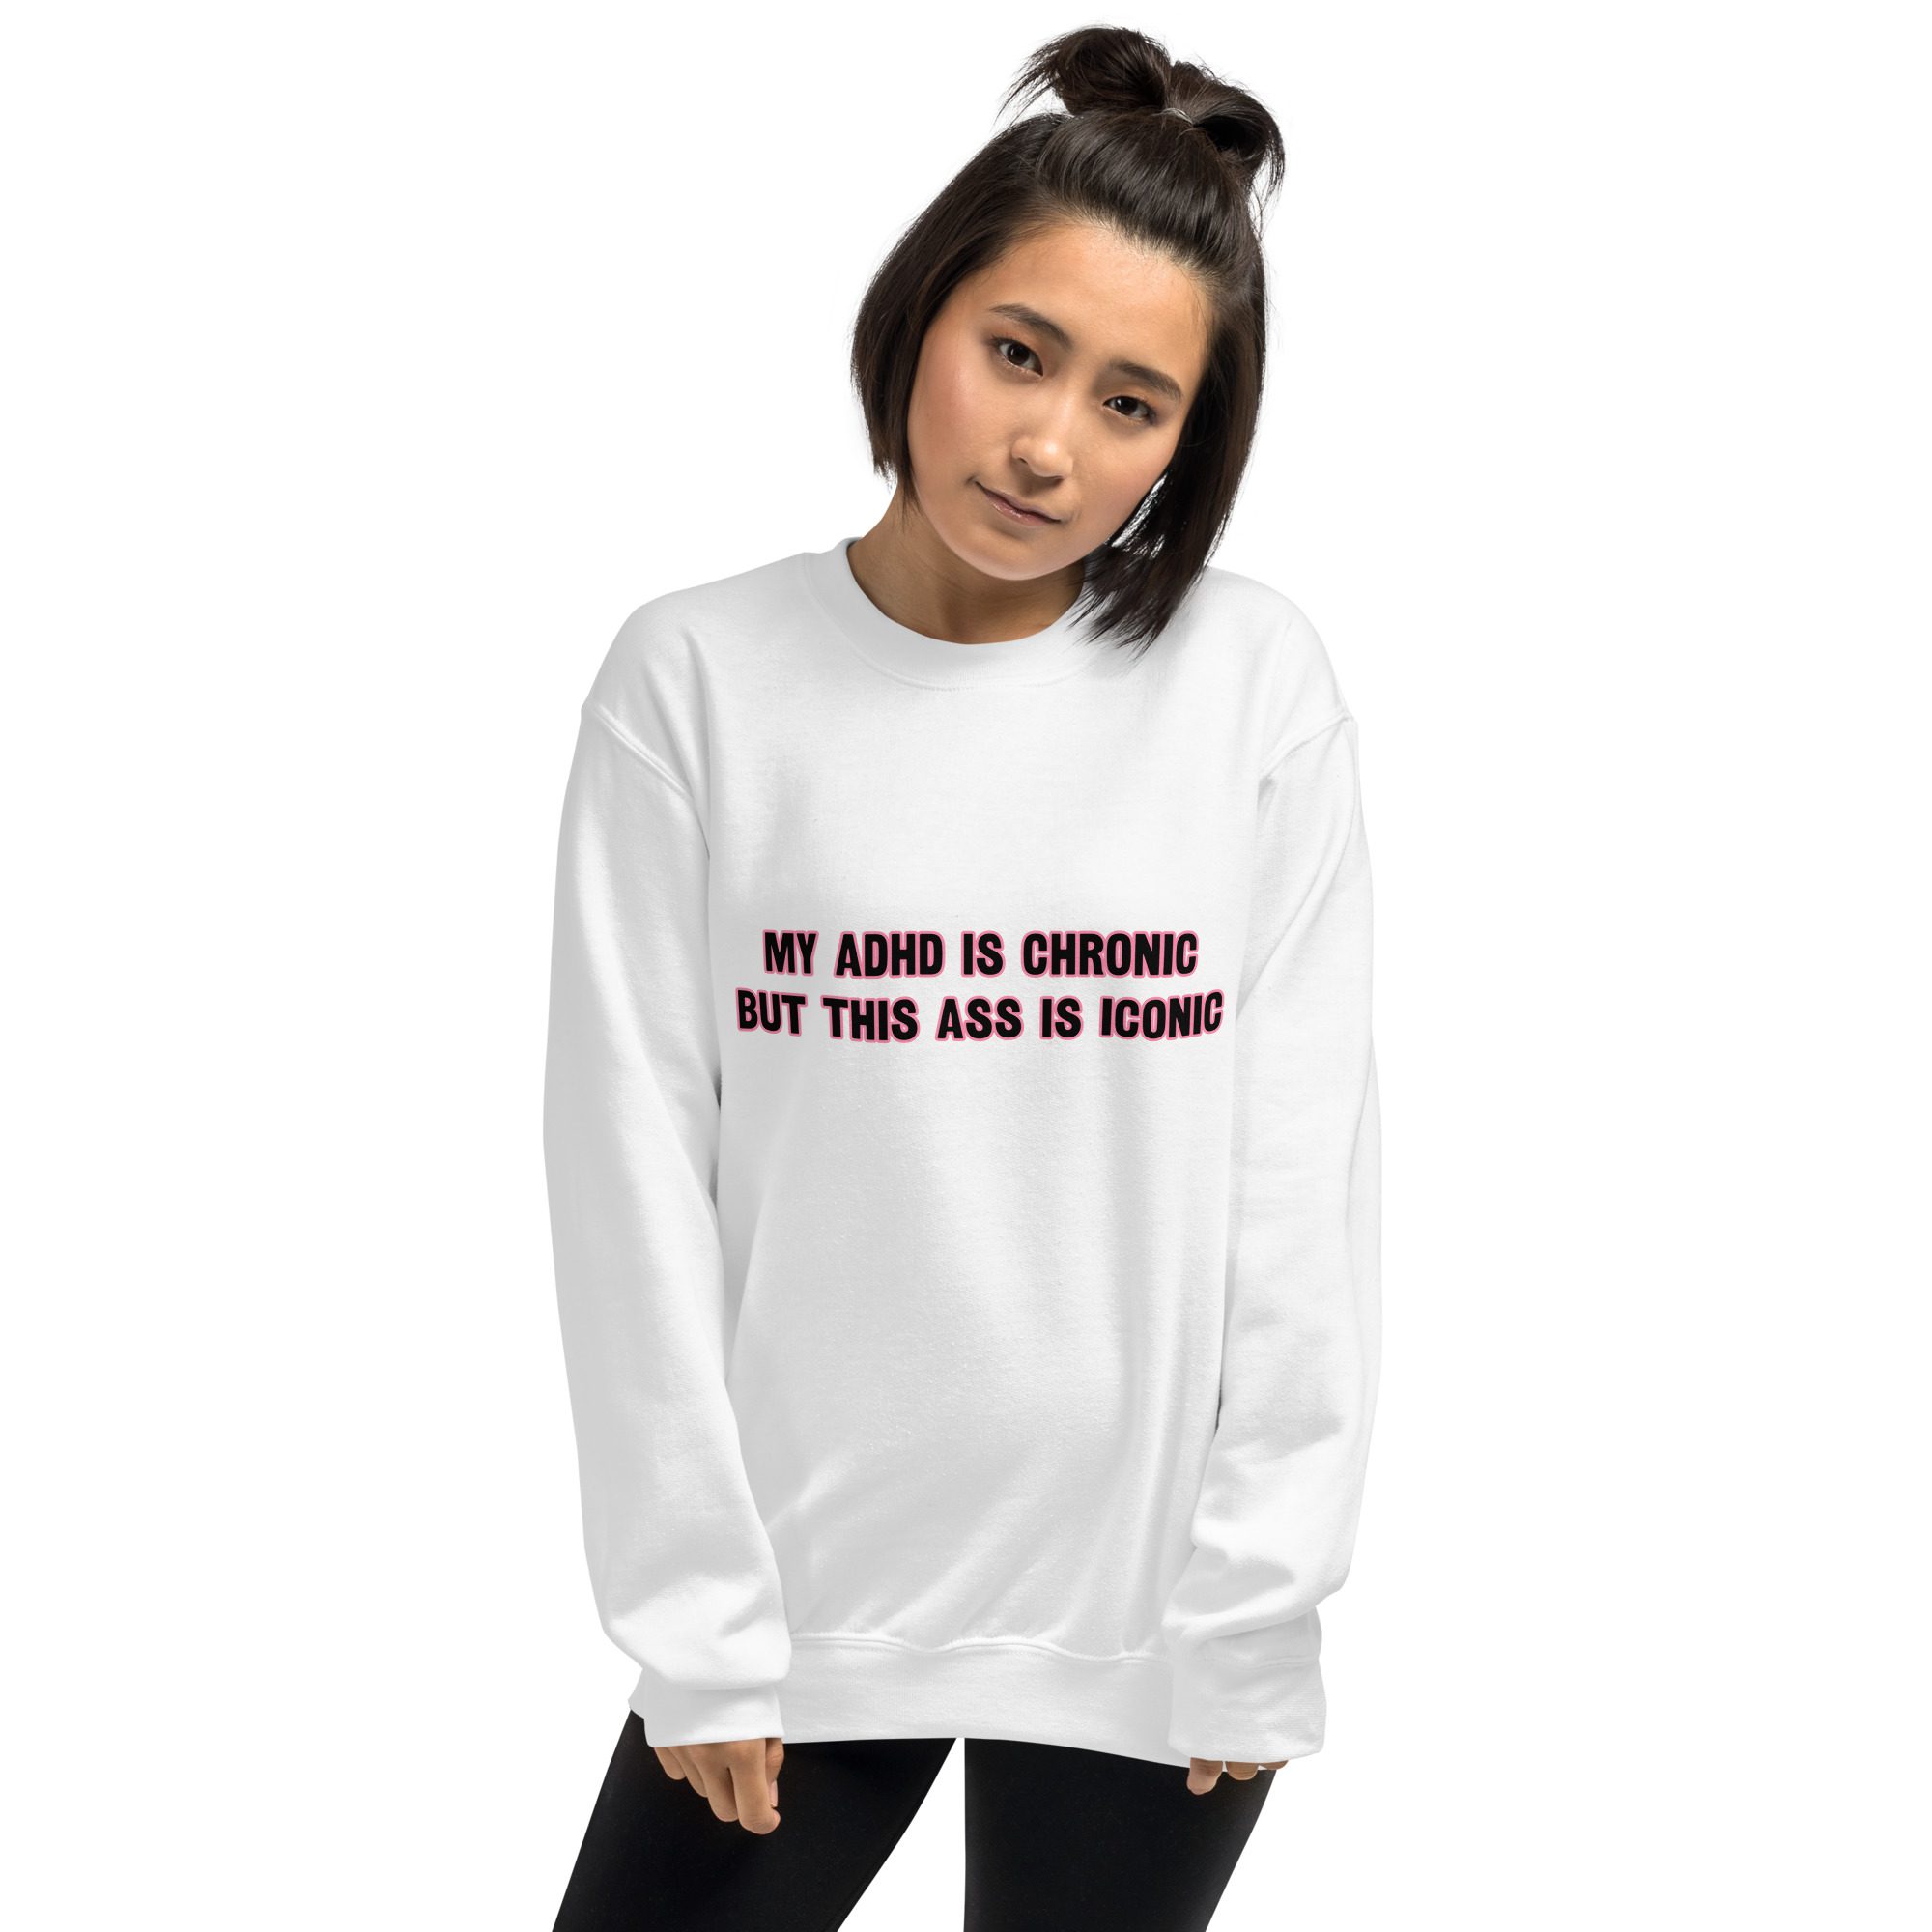 My ADHD Is Chronic But This Ass Is Iconic Unisex Sweatshirt